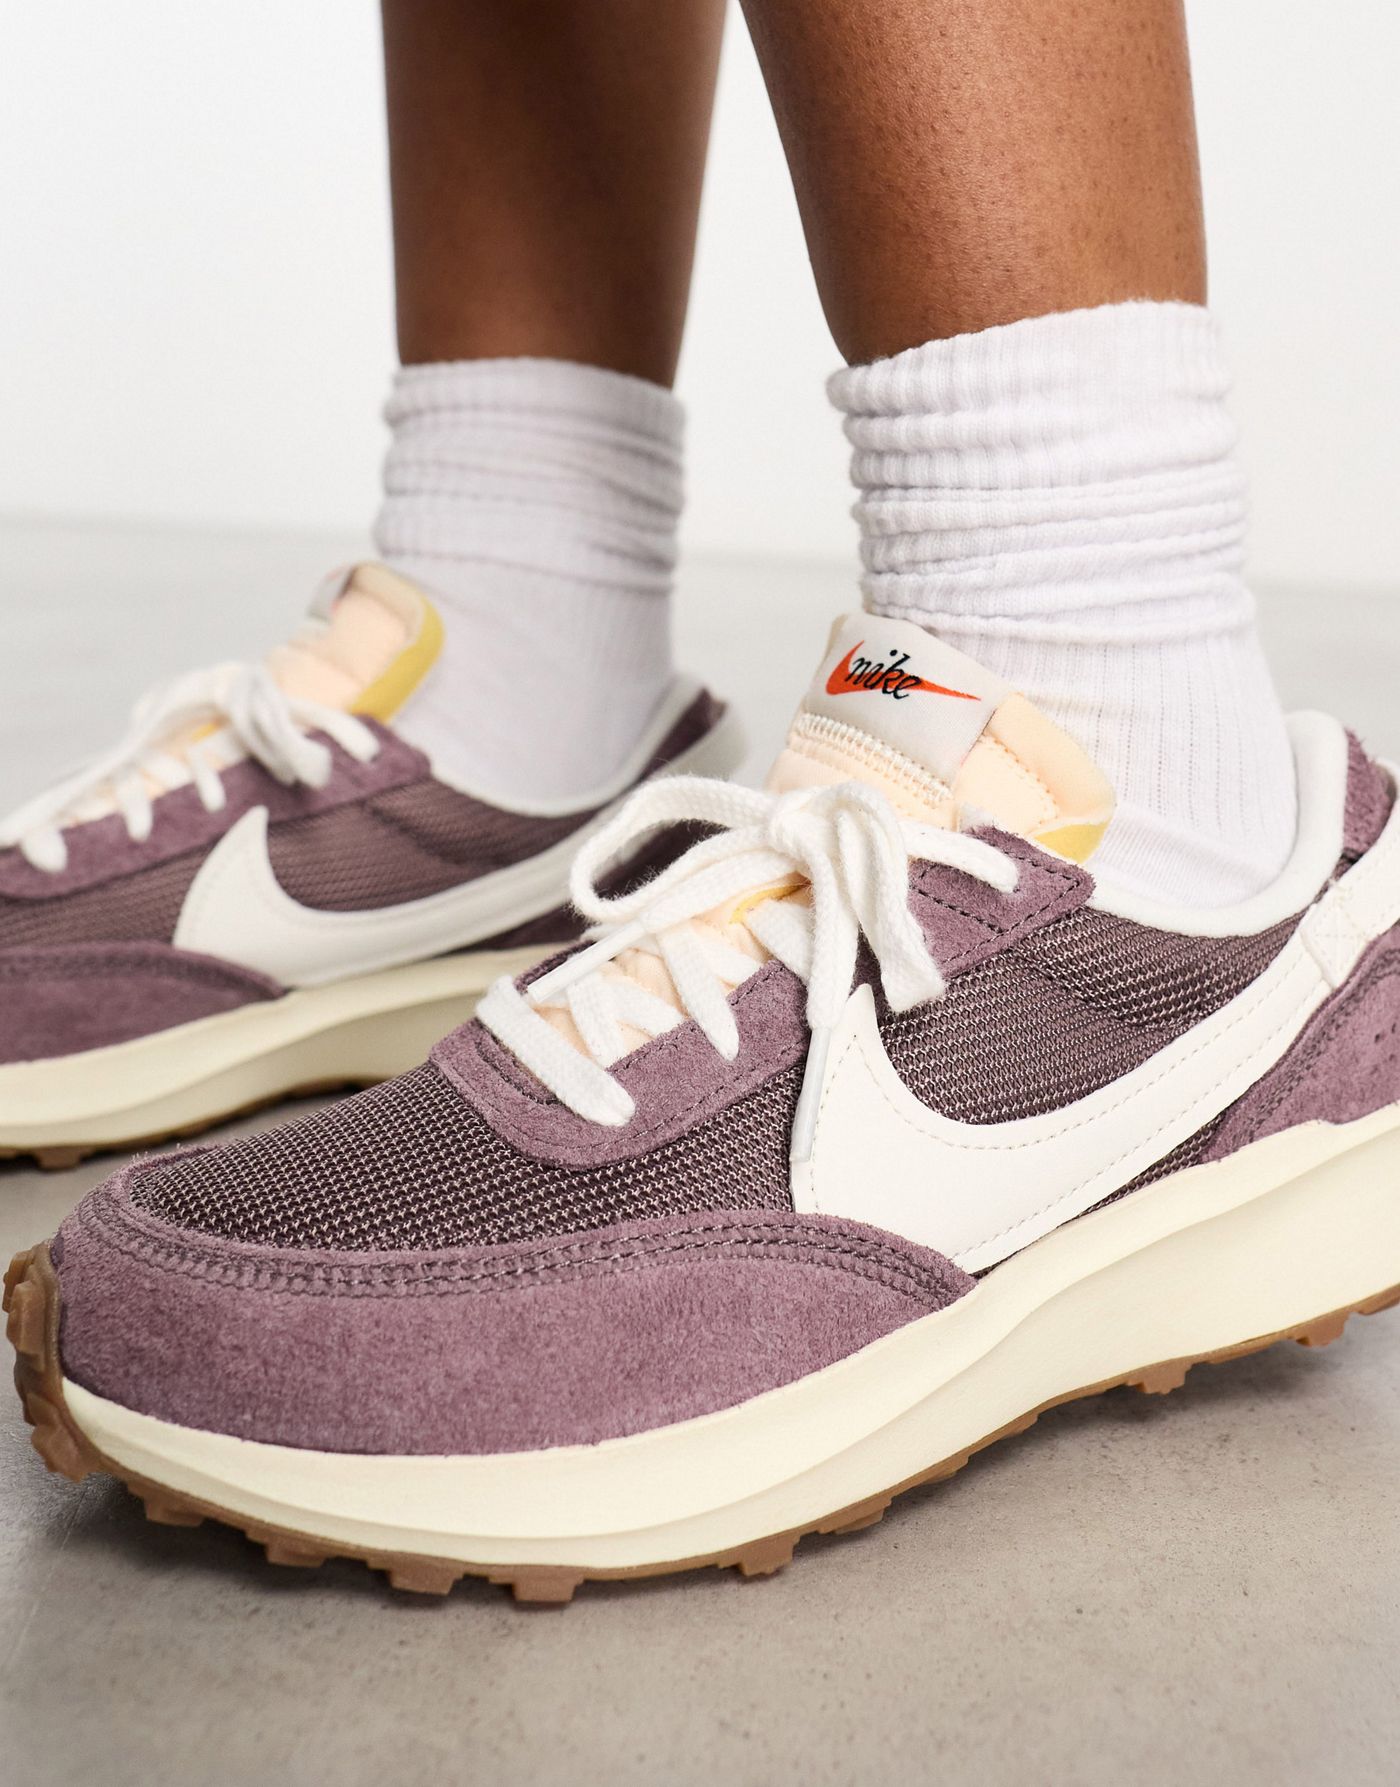 Nike Waffle Debut trainers in plum and off white